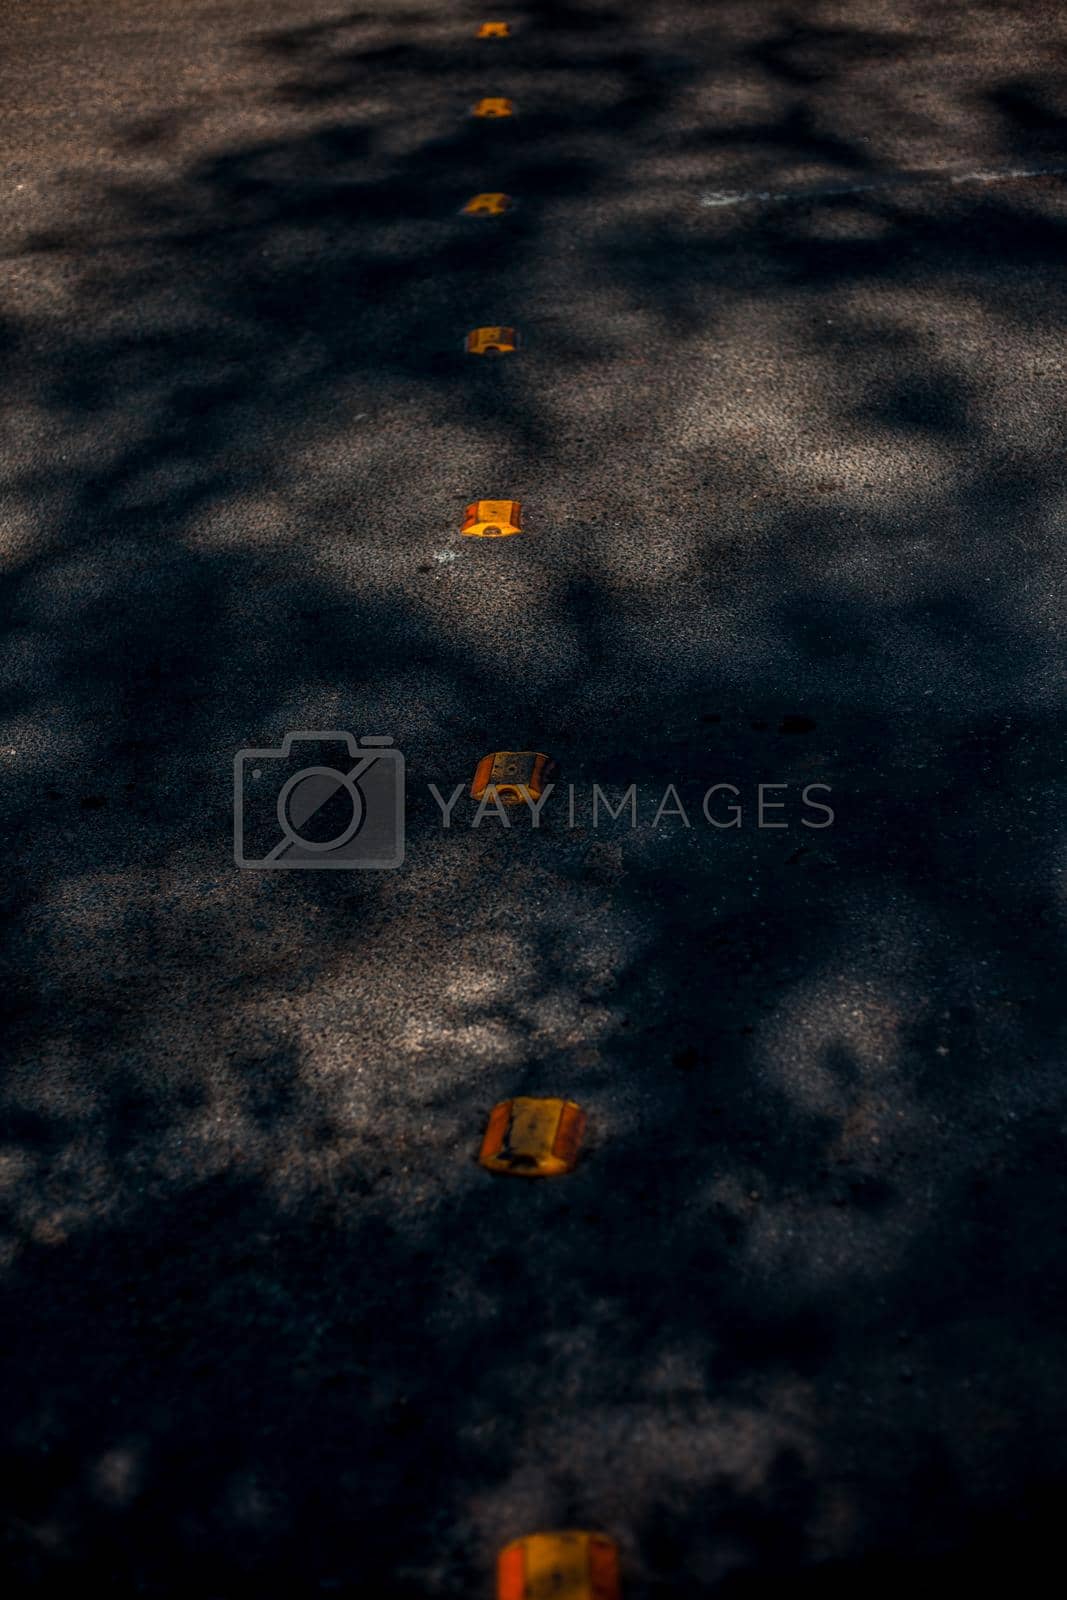 Royalty free image of Close up of solar lights fixed on the roads to indicate direction or a reflector of yellow color. by mirzamlk